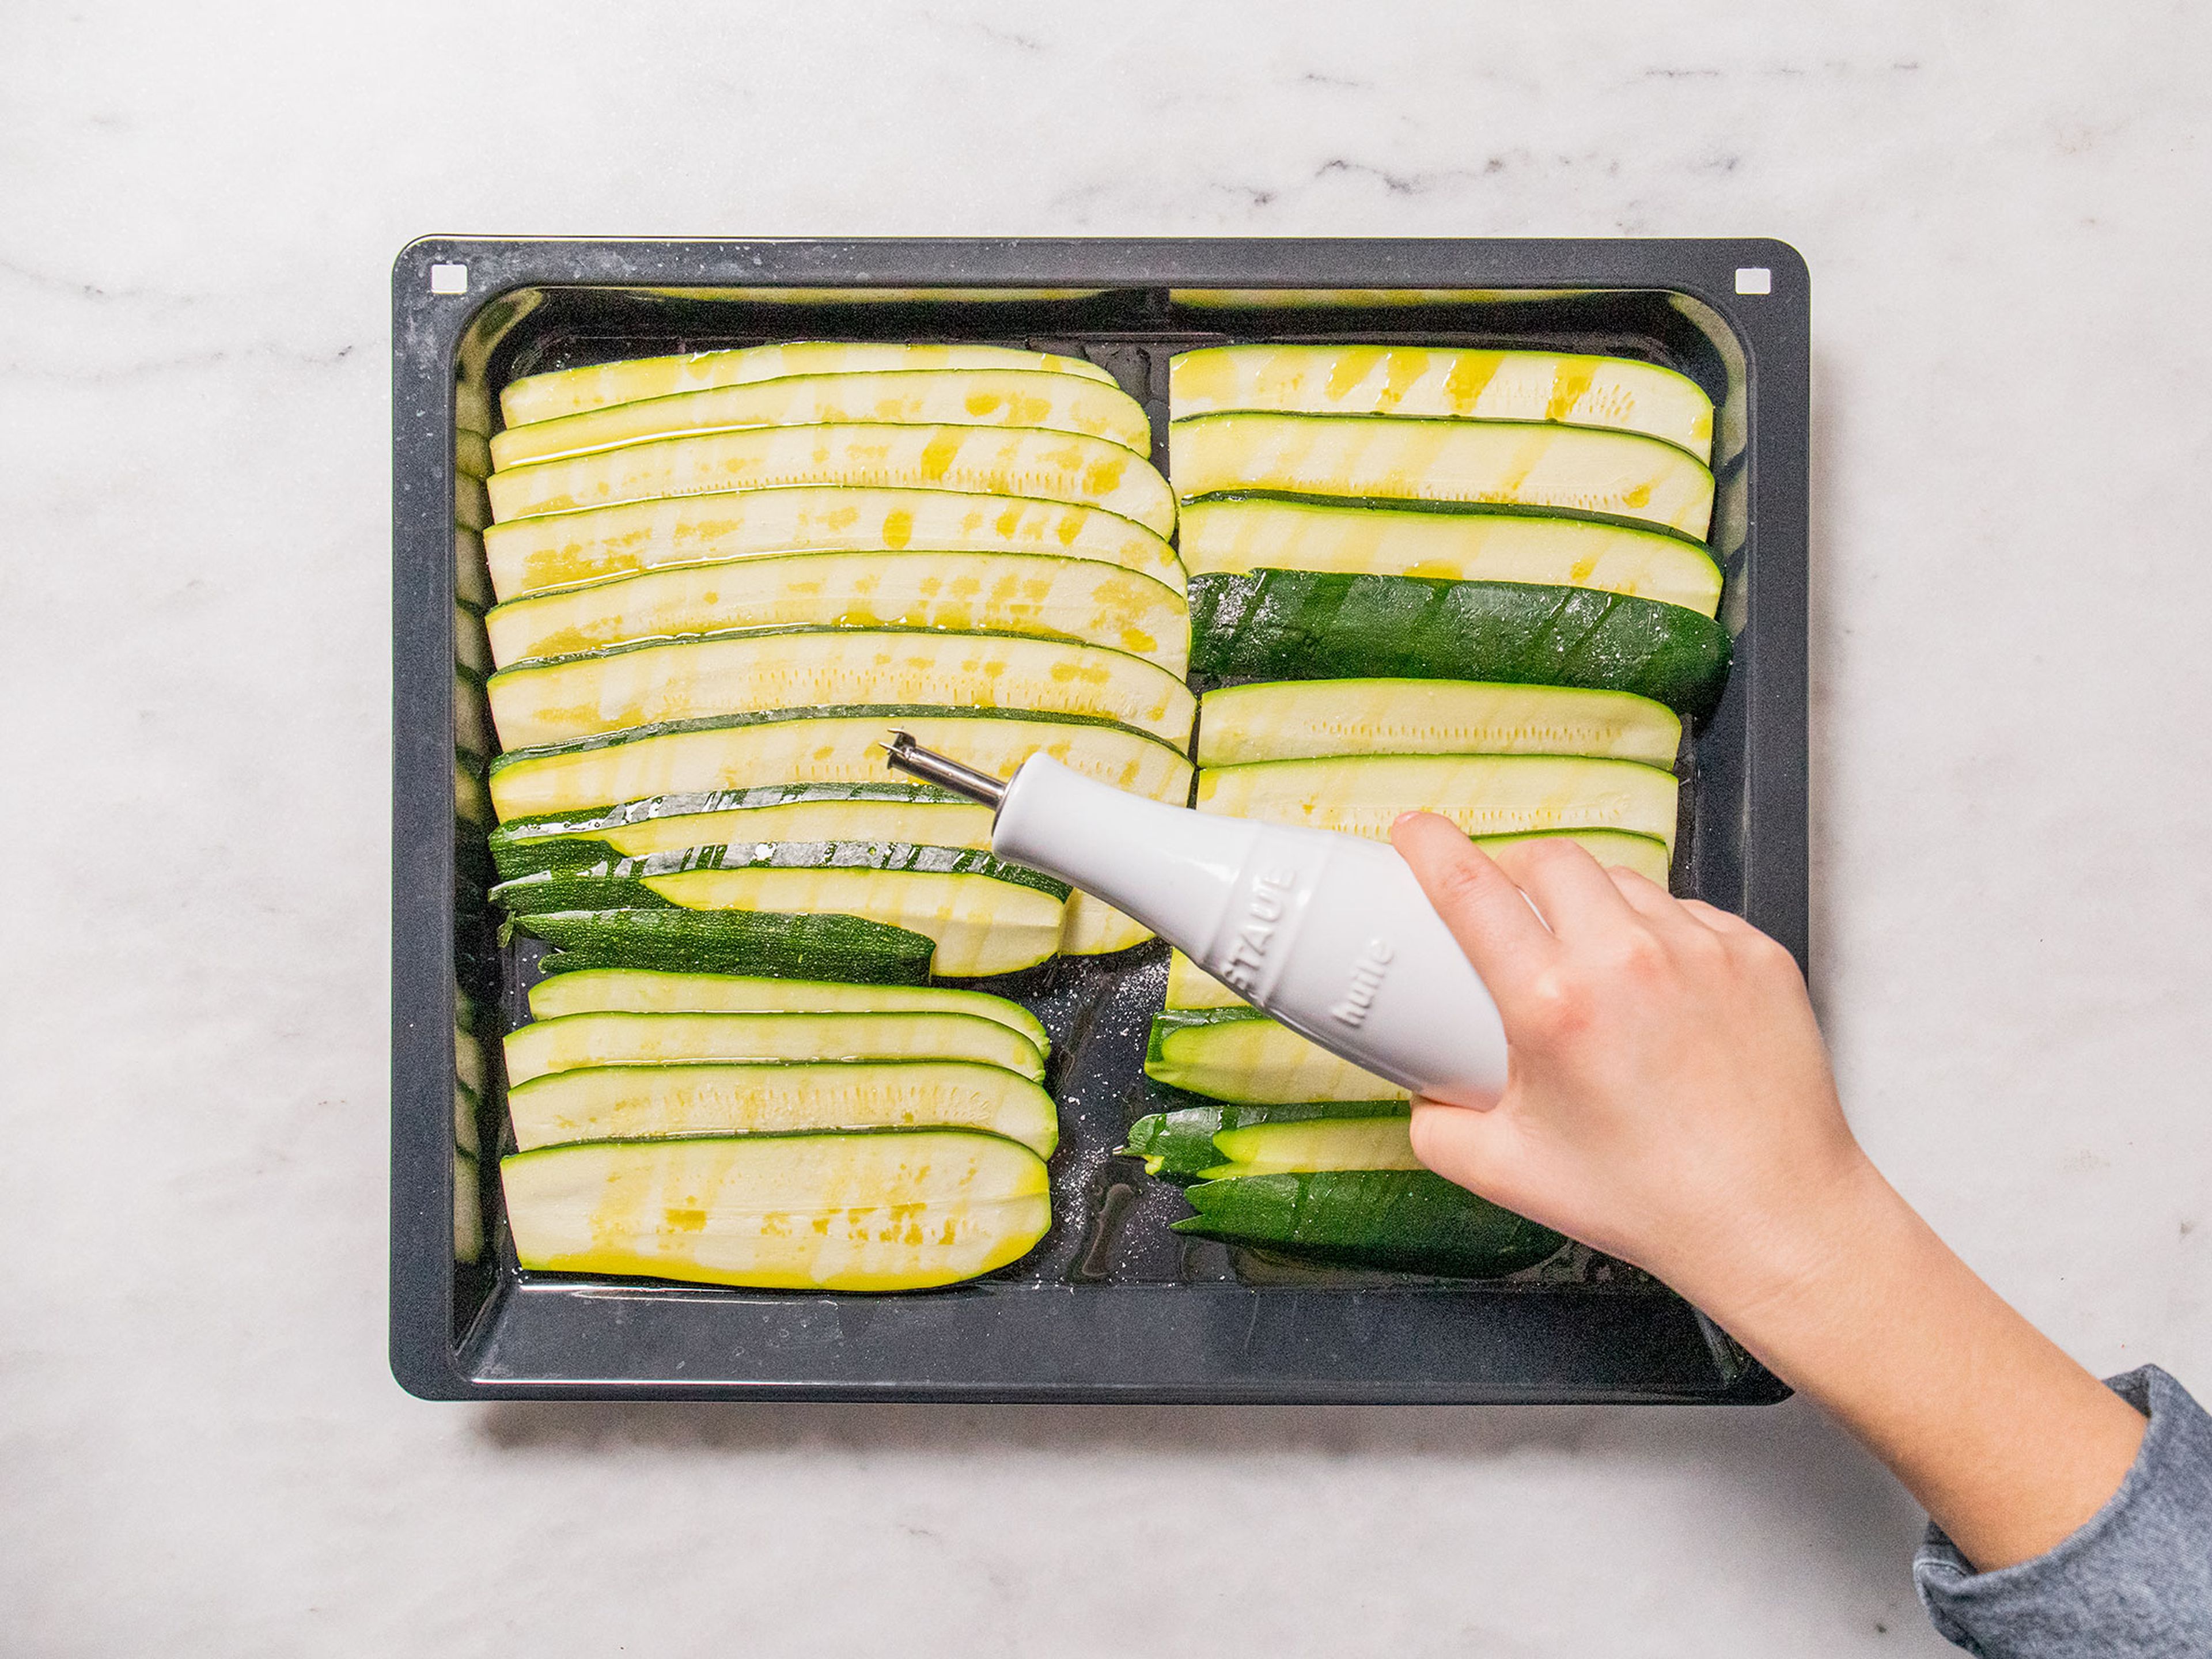 Layer zucchini slices onto a baking sheet and season with some salt. Drizzle with olive oil and bake for approx. 20 min.